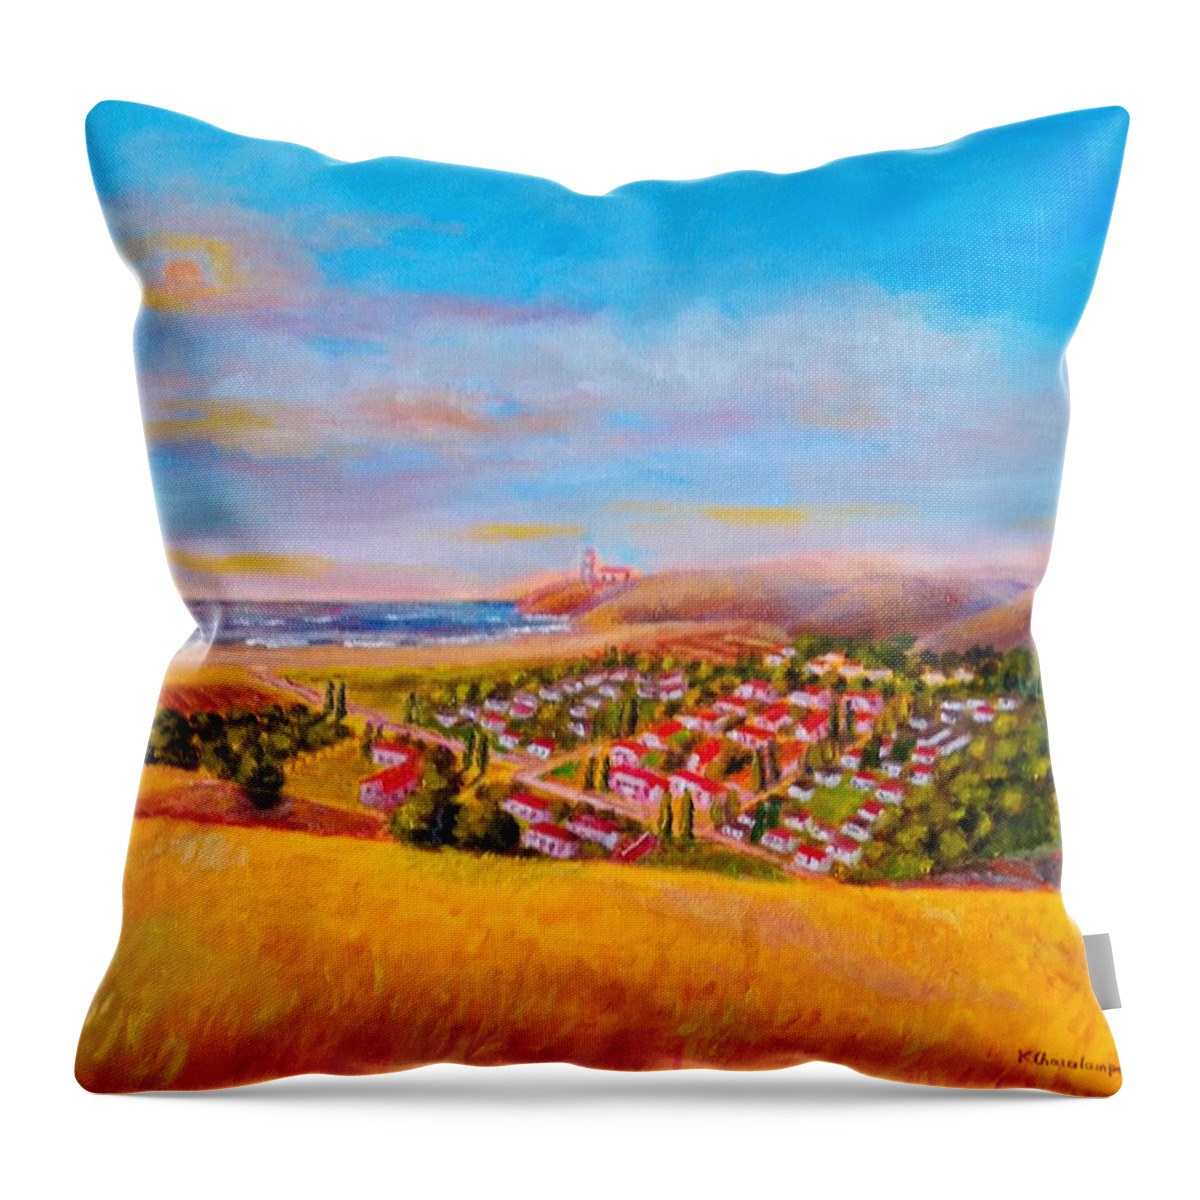 Originals Throw Pillow featuring the painting View from hill by Konstantinos Charalampopoulos